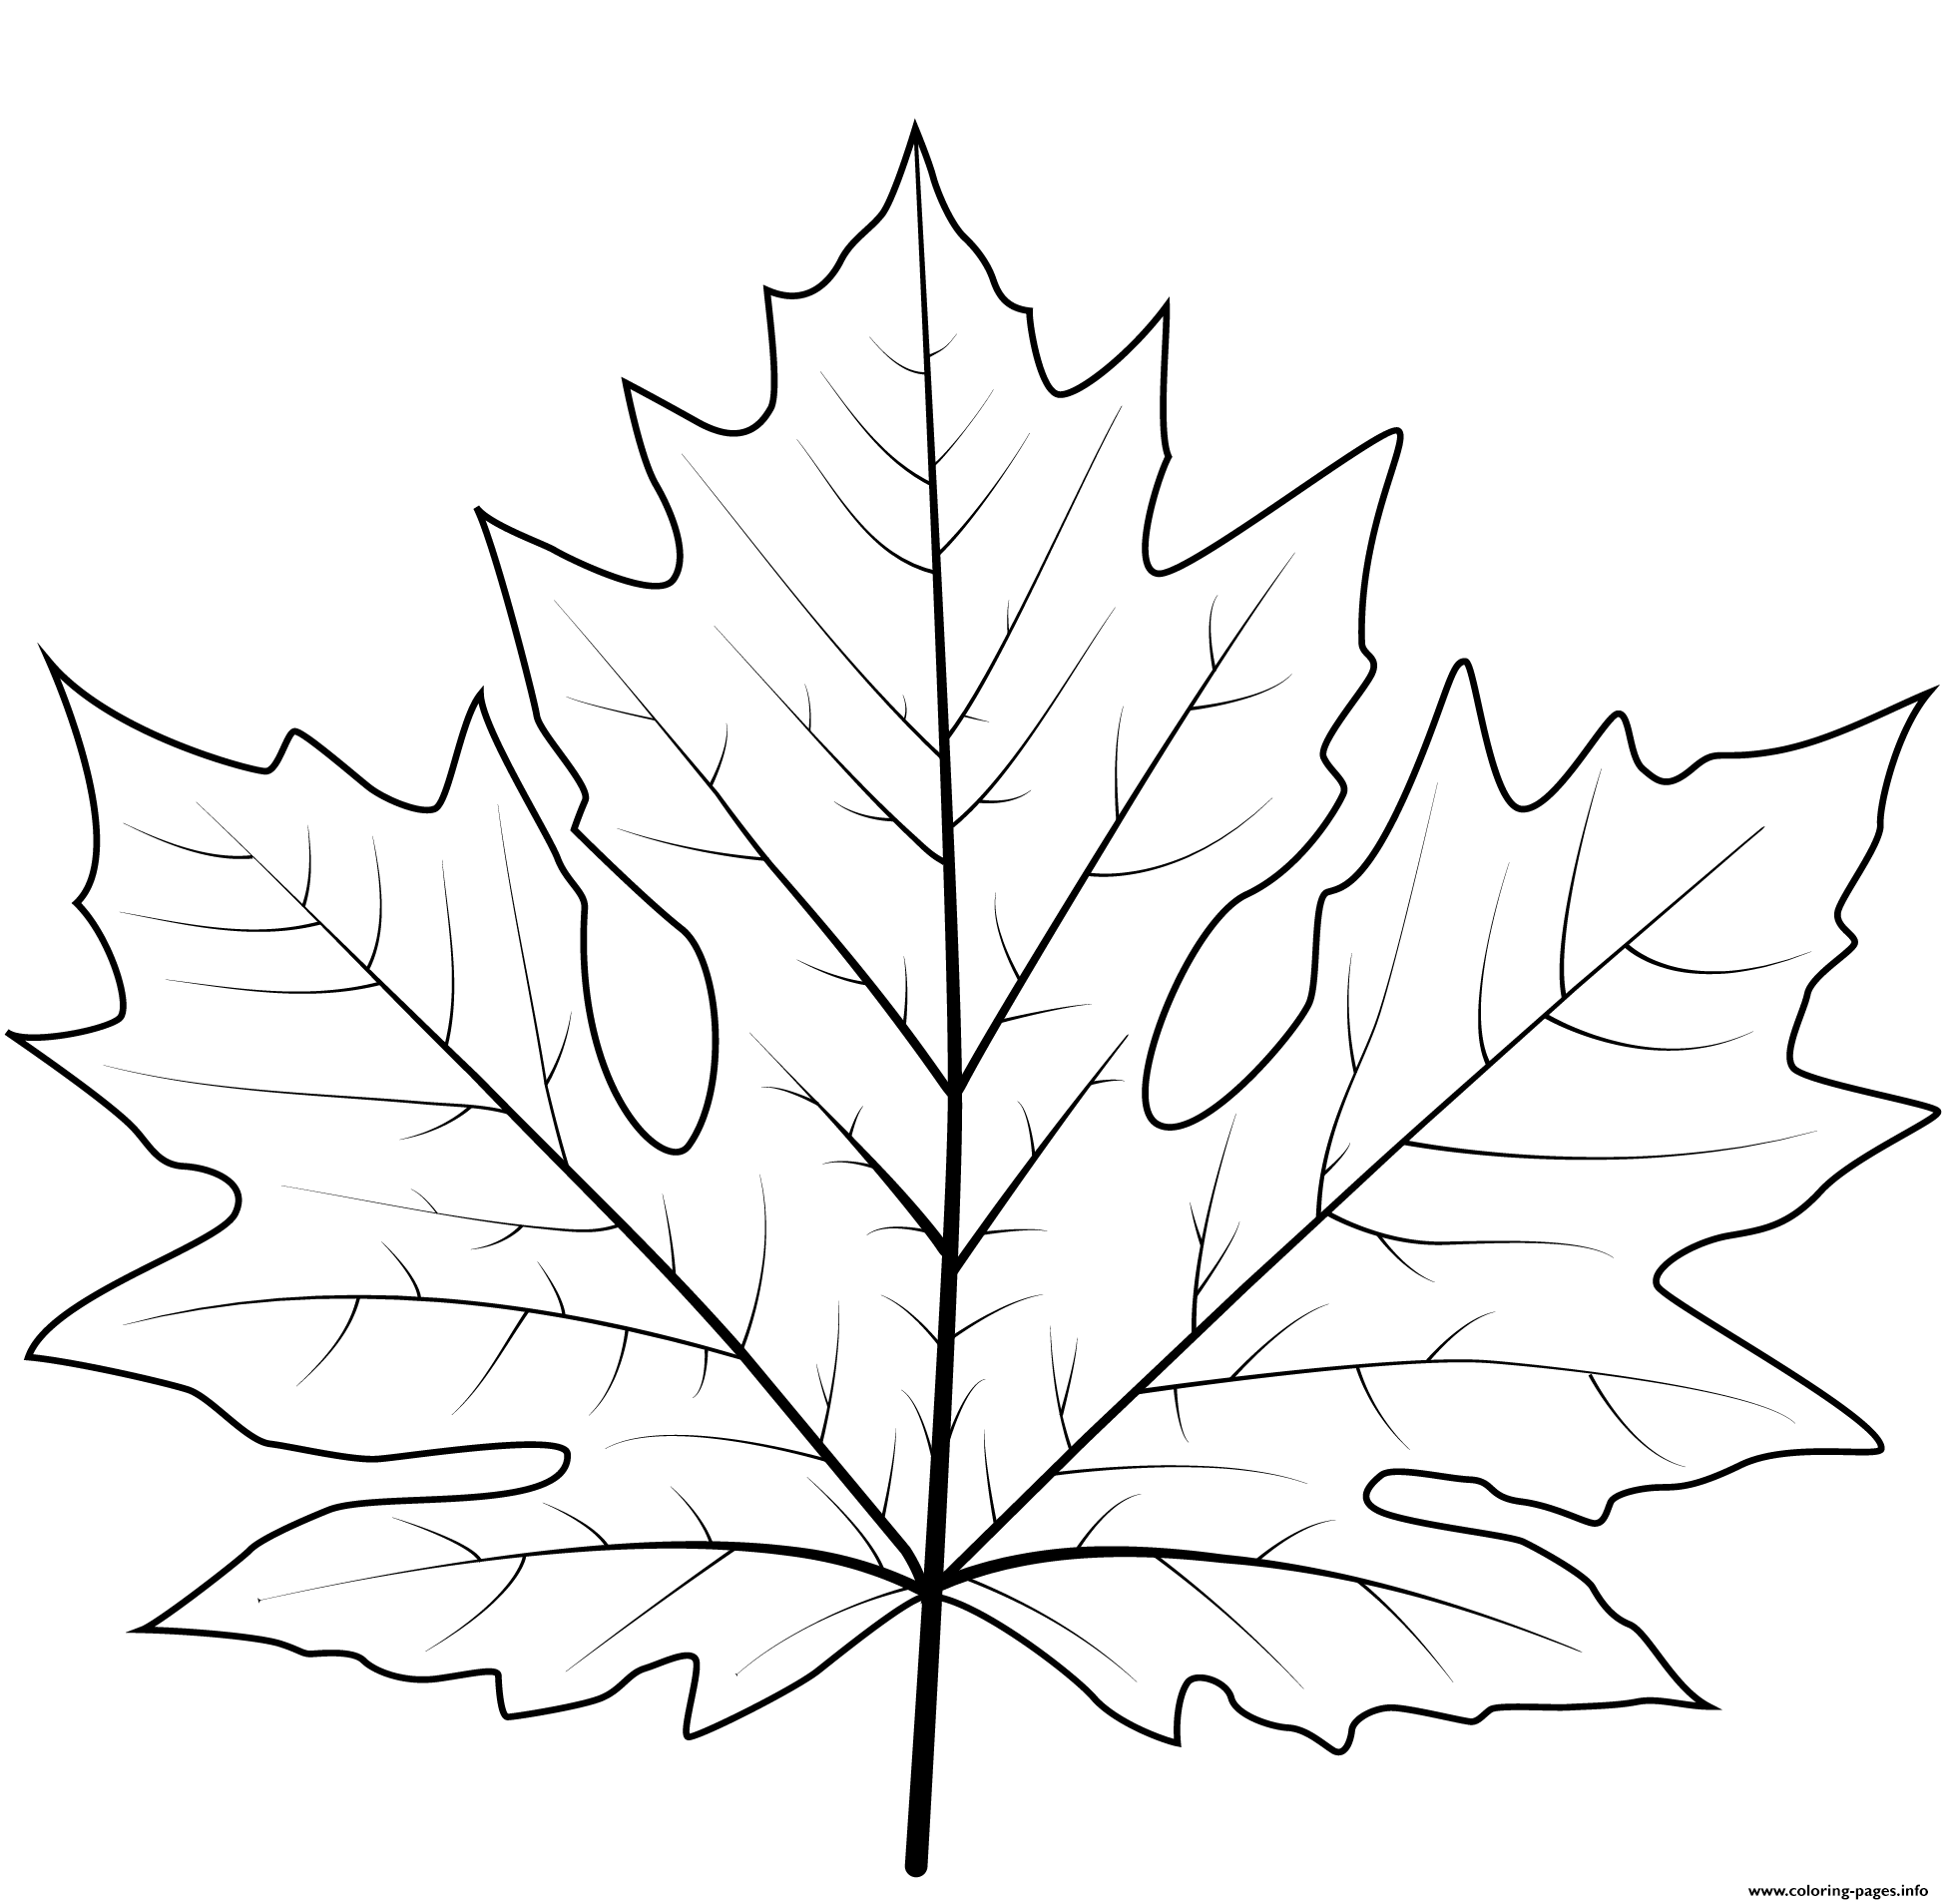 20-free-printable-leaf-coloring-pages-everfreecoloring